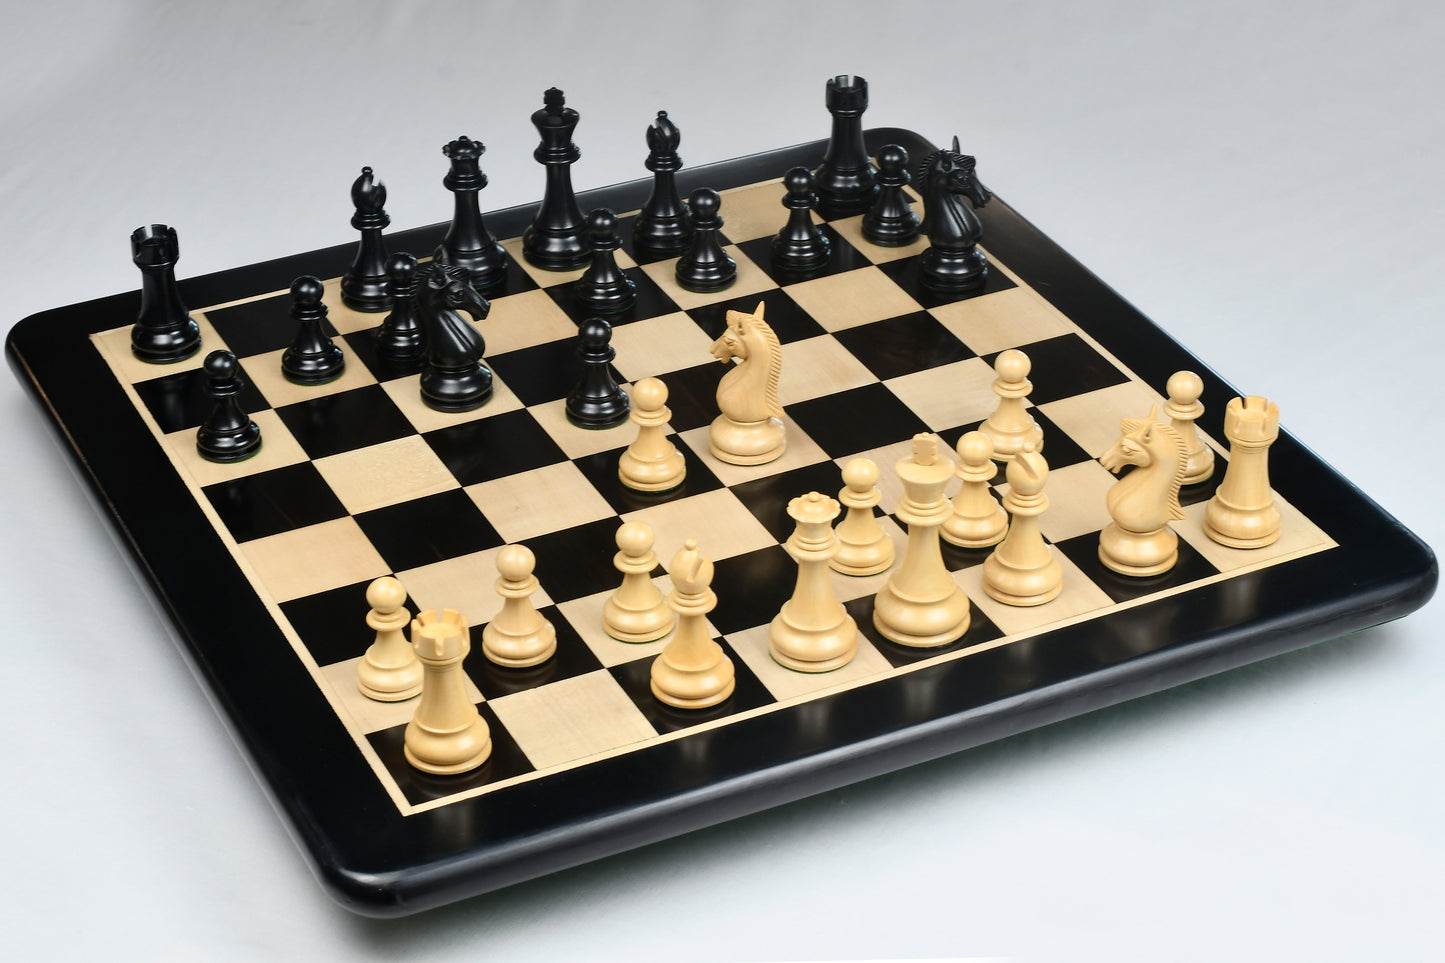 The Candidates Series Staunton Chess Pieces in Ebony / Box Wood - 3.75" King